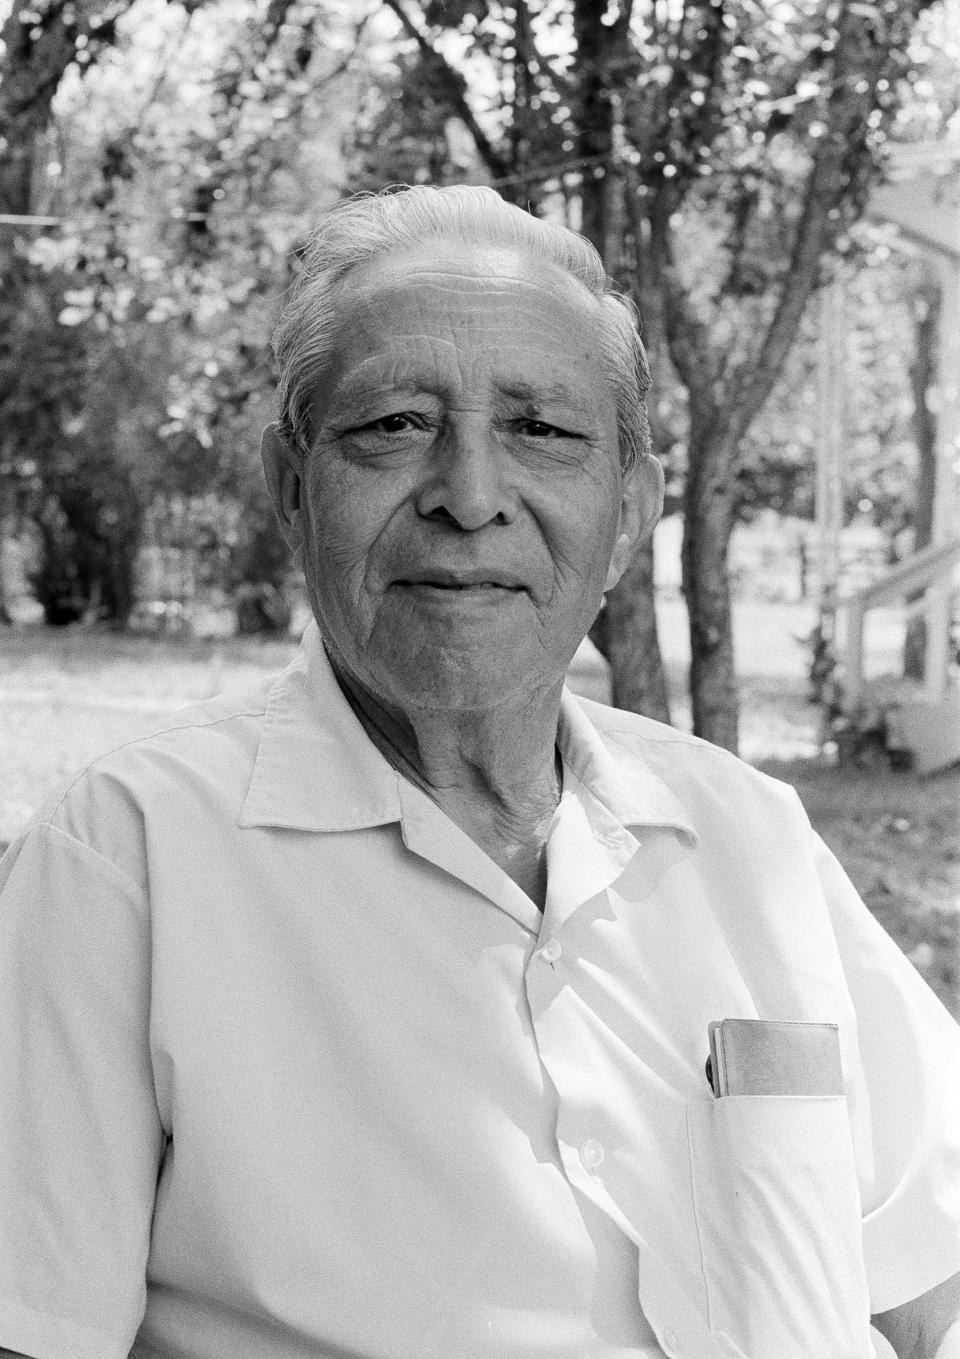 Former Texas election judge, Luis Salas, who played a key role in the 1948 Senate race between former Gov. Coke Stevenson and Rep. Lyndon B. Johnson, is shown in Alice, Texas, July 18, 1977. (AP Photo/Ed Kolenovsky)